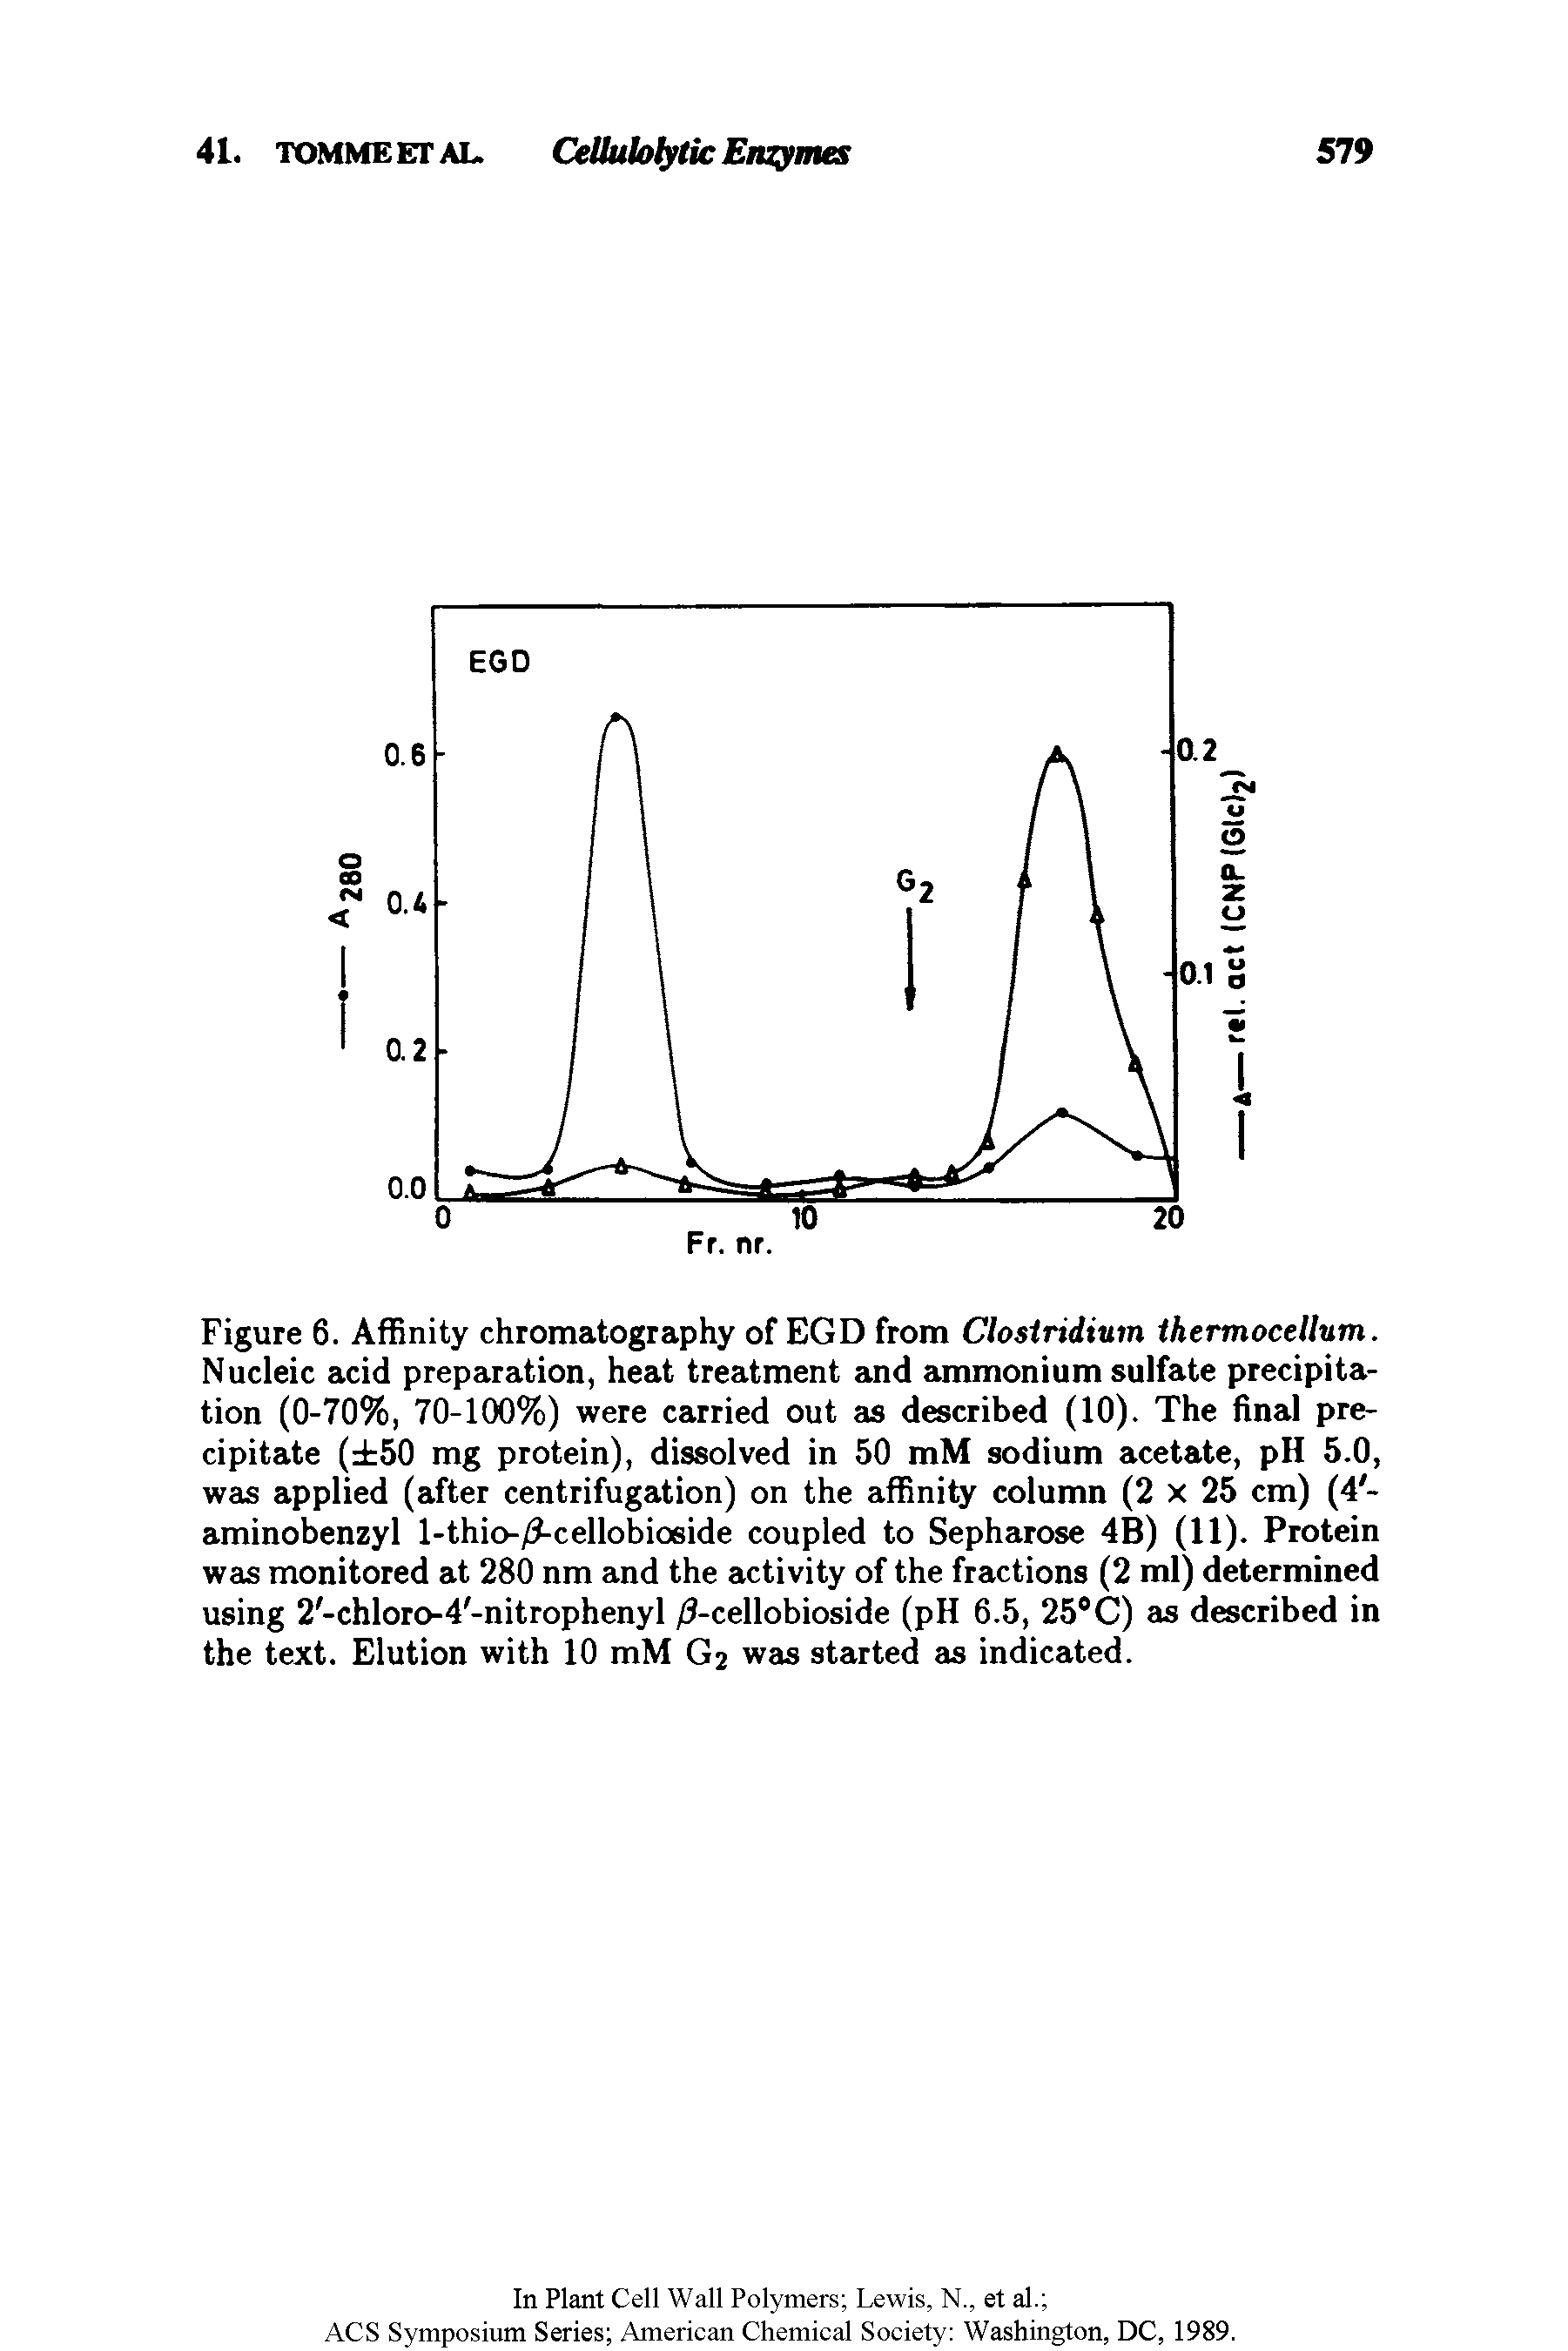 Figure 6. Affinity chromatography of EGD from Clostridium thermocellum. Nucleic acid preparation, heat treatment and ammonium sulfate precipitation (0-70%, 70-100%) were carried out as described (10). The final precipitate ( 50 mg protein), dissolved in 50 mM sodium acetate, pH 5.0, was applied (after centrifugation) on the affinity column (2 x 25 cm) (4 -aminobenzyl l-thio-/ -cellobioside coupled to Sepharose 4B) (11). Protein was monitored at 280 nm and the activity of the fractions (2 ml) determined using 2 -chloro-4 -nitrophenyl / -cellobioside (pH 6.5, 25°C) as described in the text. Elution with 10 mM G2 was started as indicated.